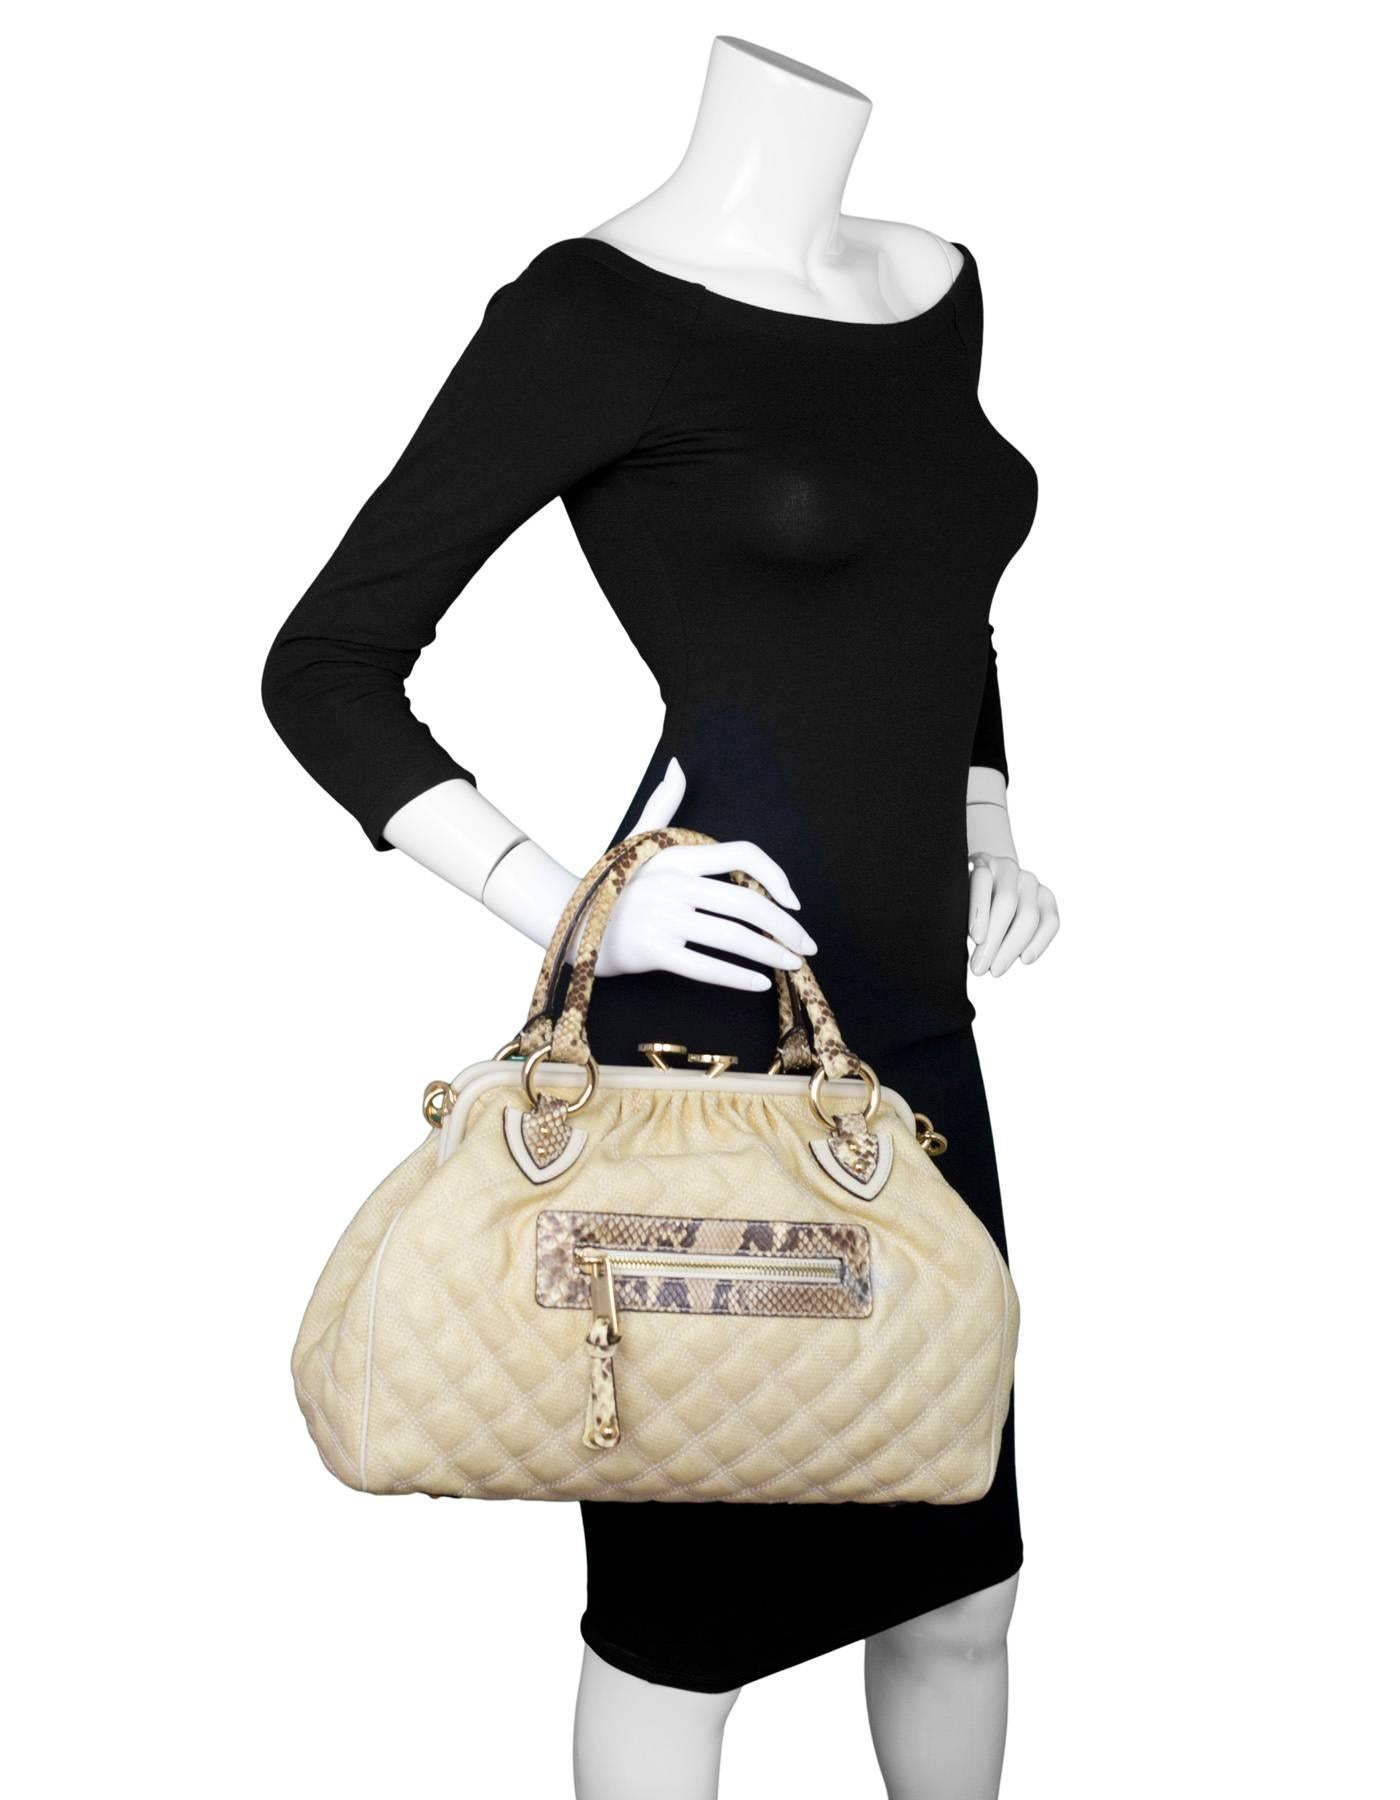 Marc Jacobs Cream Raffia & Python Stam Bag

Made In: Italy
Color: Cream, beige
Hardware: Goldtone
Materials: Python, raffia
Lining: Cream textile
Closure/Opening: Frame bag style with kiss-lock closure
Exterior Pockets: One front zipper